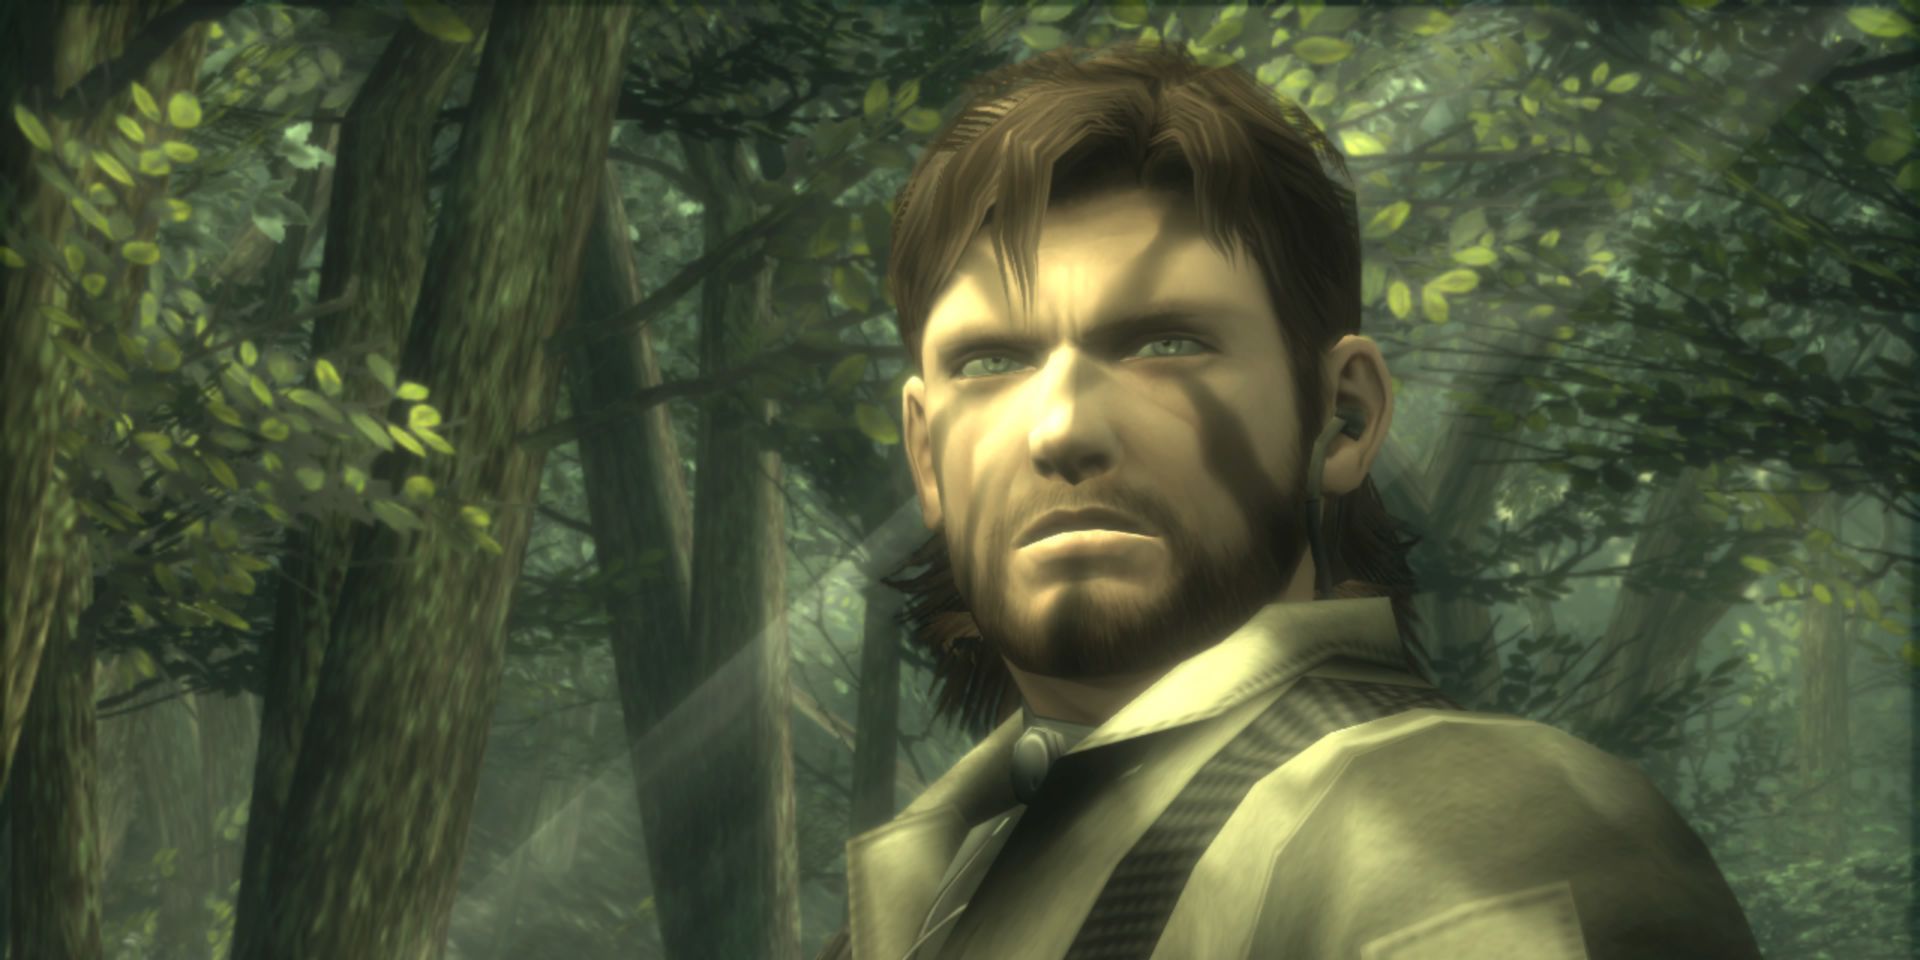 Metal Gear Solid 3 Remake Looks Amazing But Its “Gameplay” Is Worrying